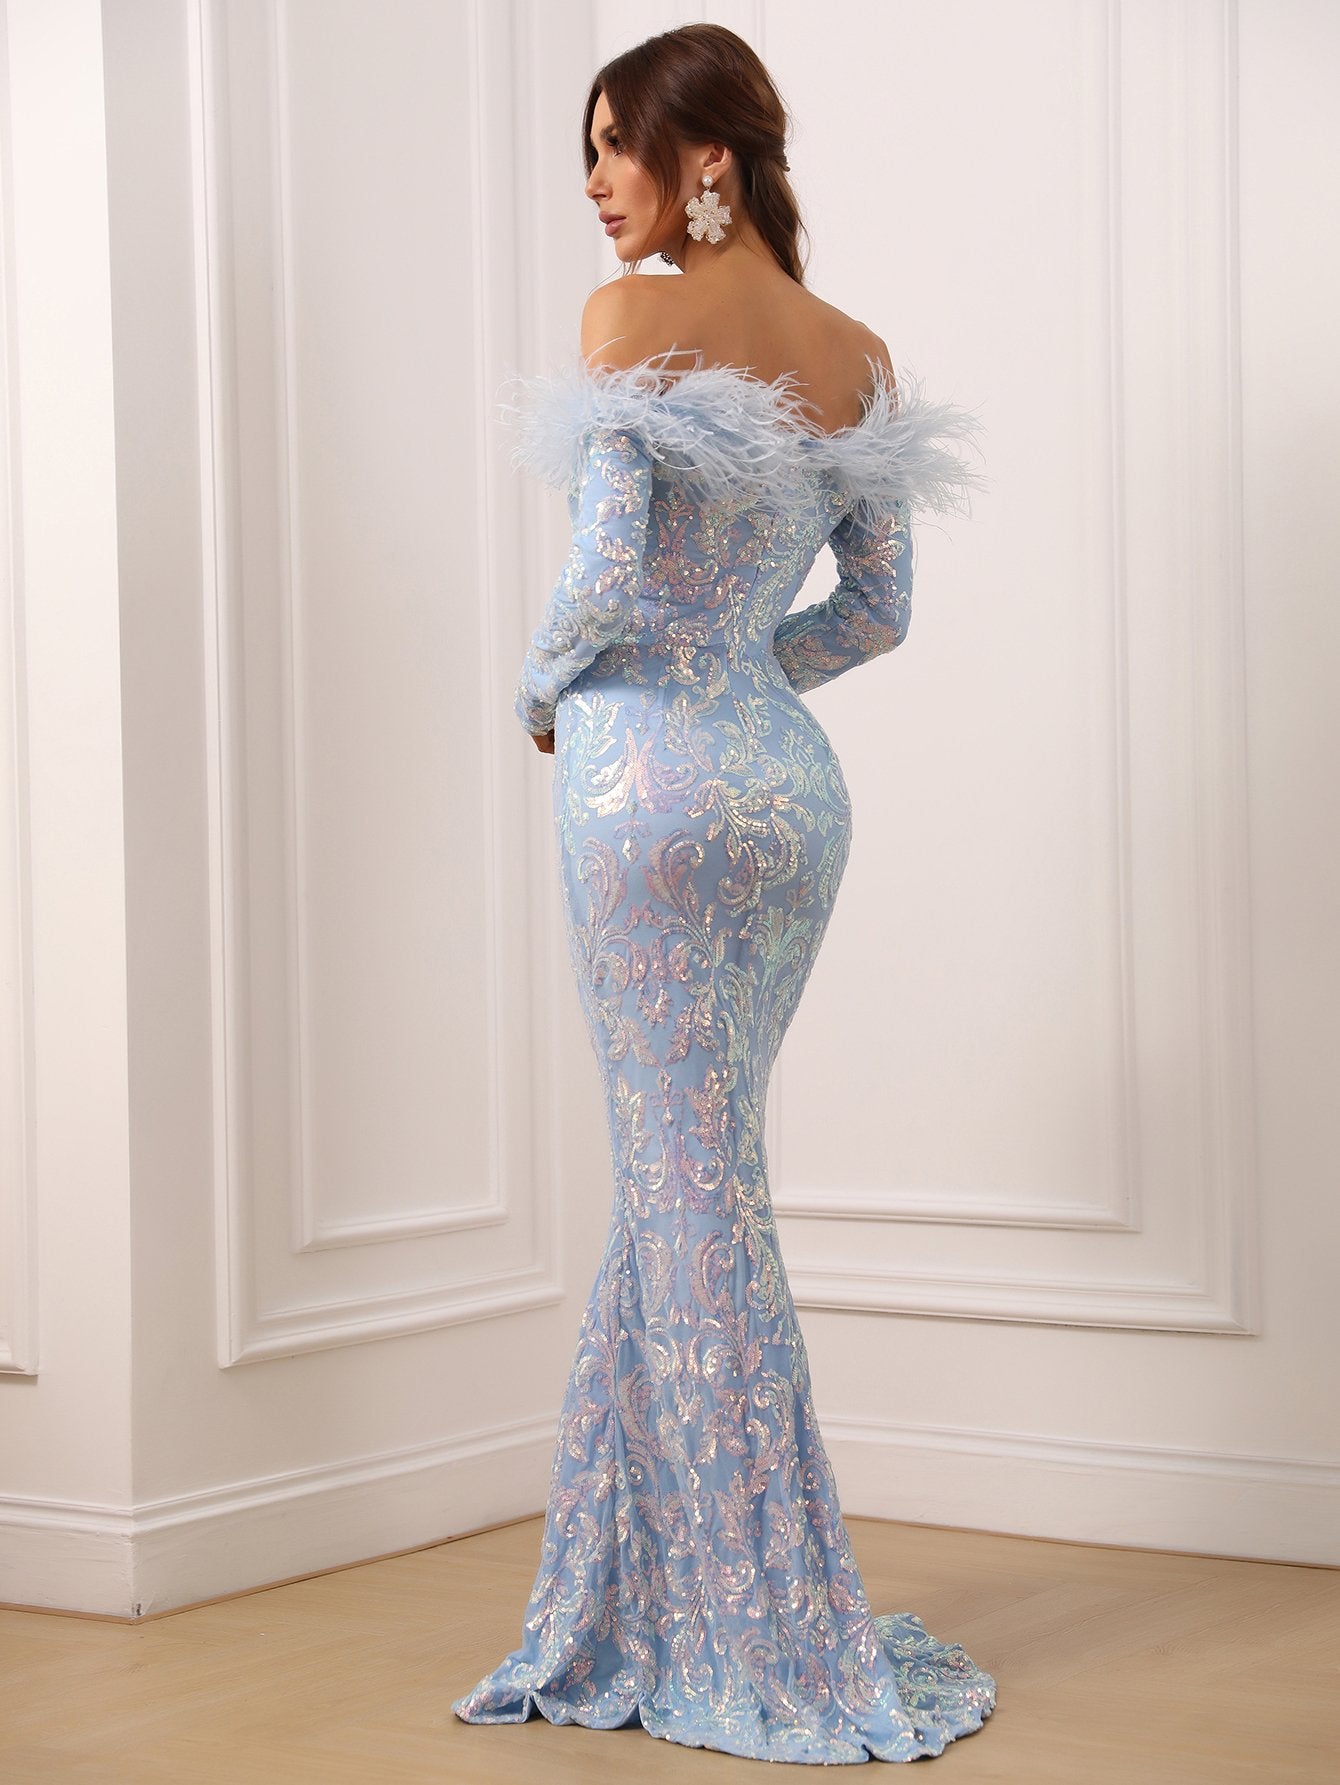 Evening Gown Long Sleeve Prom Dress With Feathers